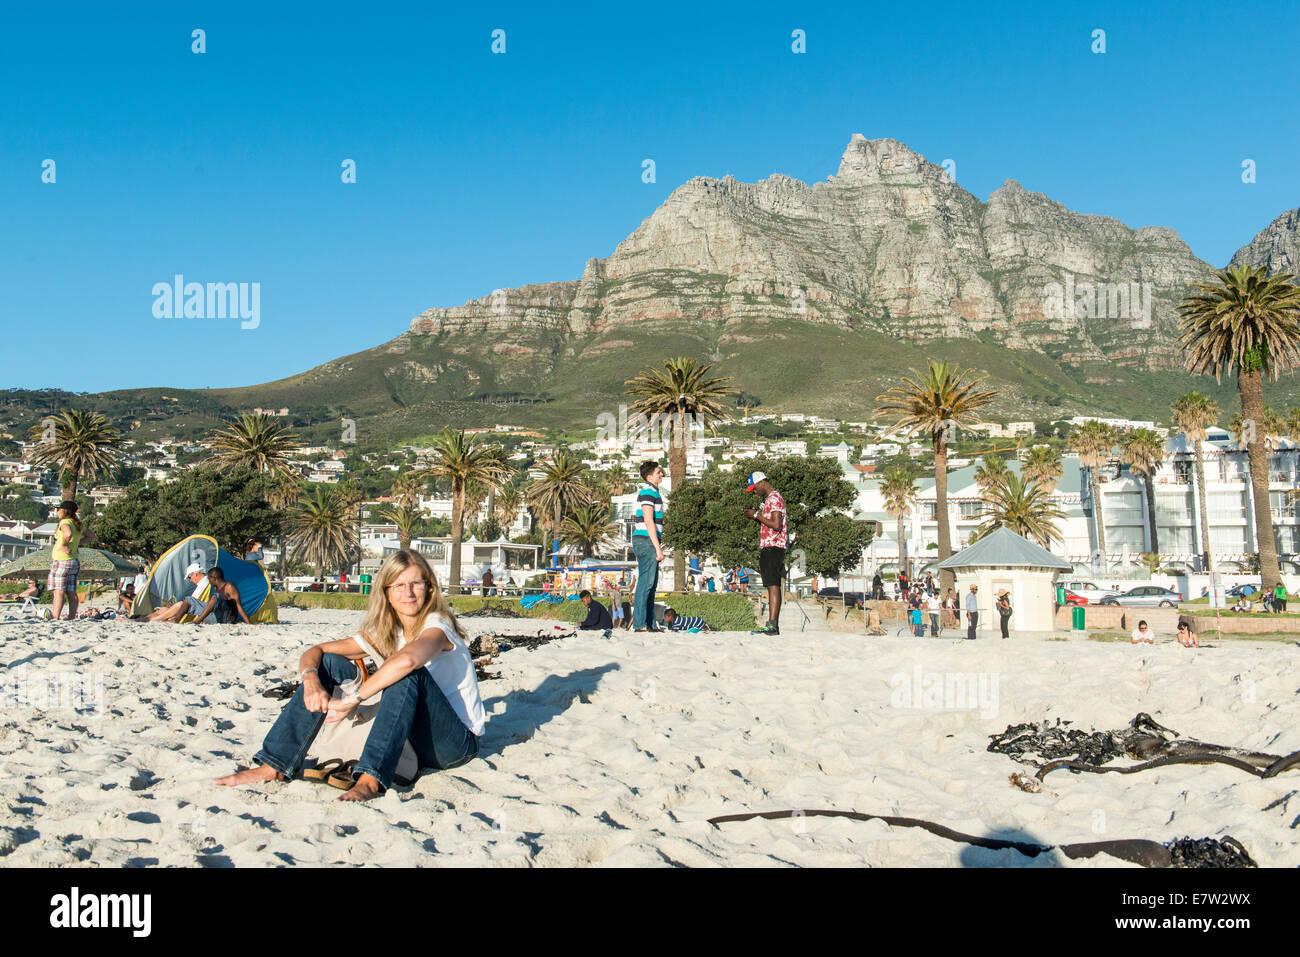 People on the beach of Camps Bay, Cape Town, South Africa Stock Photo